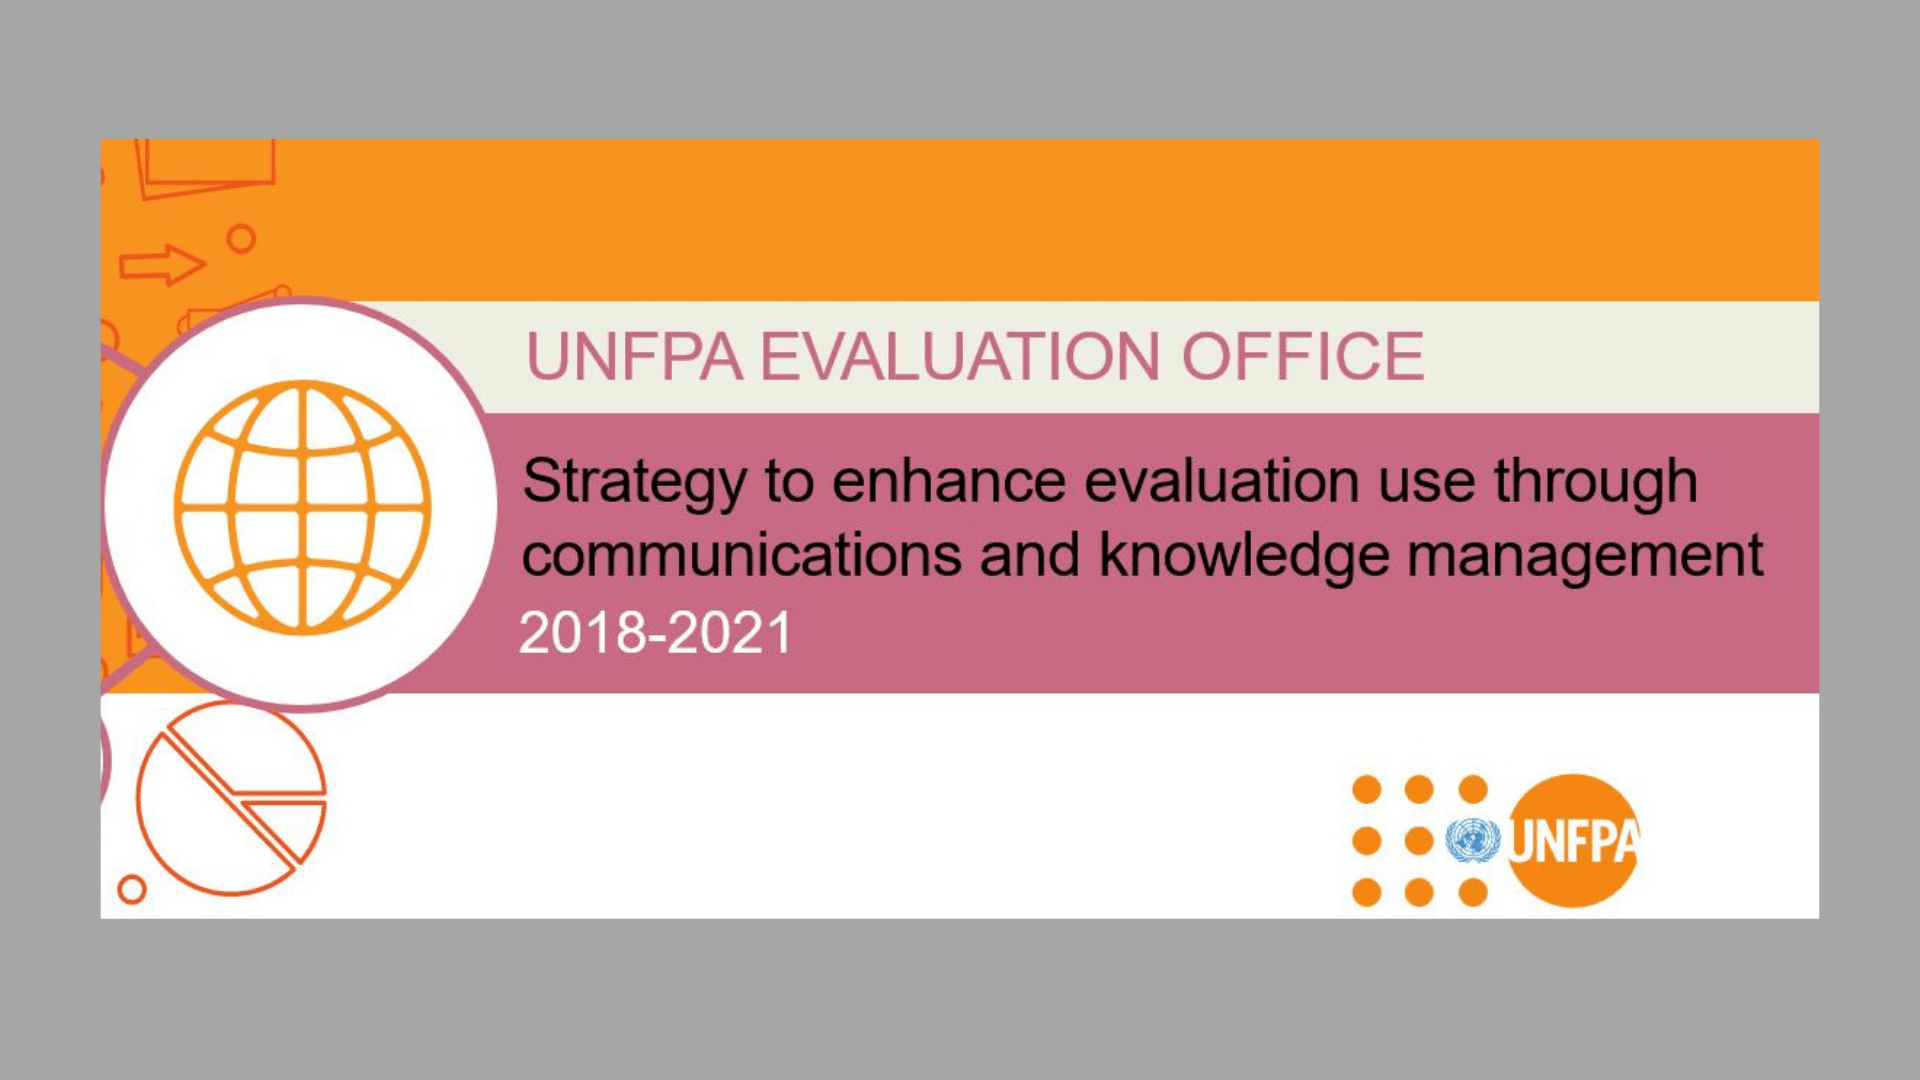 Strategy to enhance evaluation use through communications and knowledge management (2018-2021)